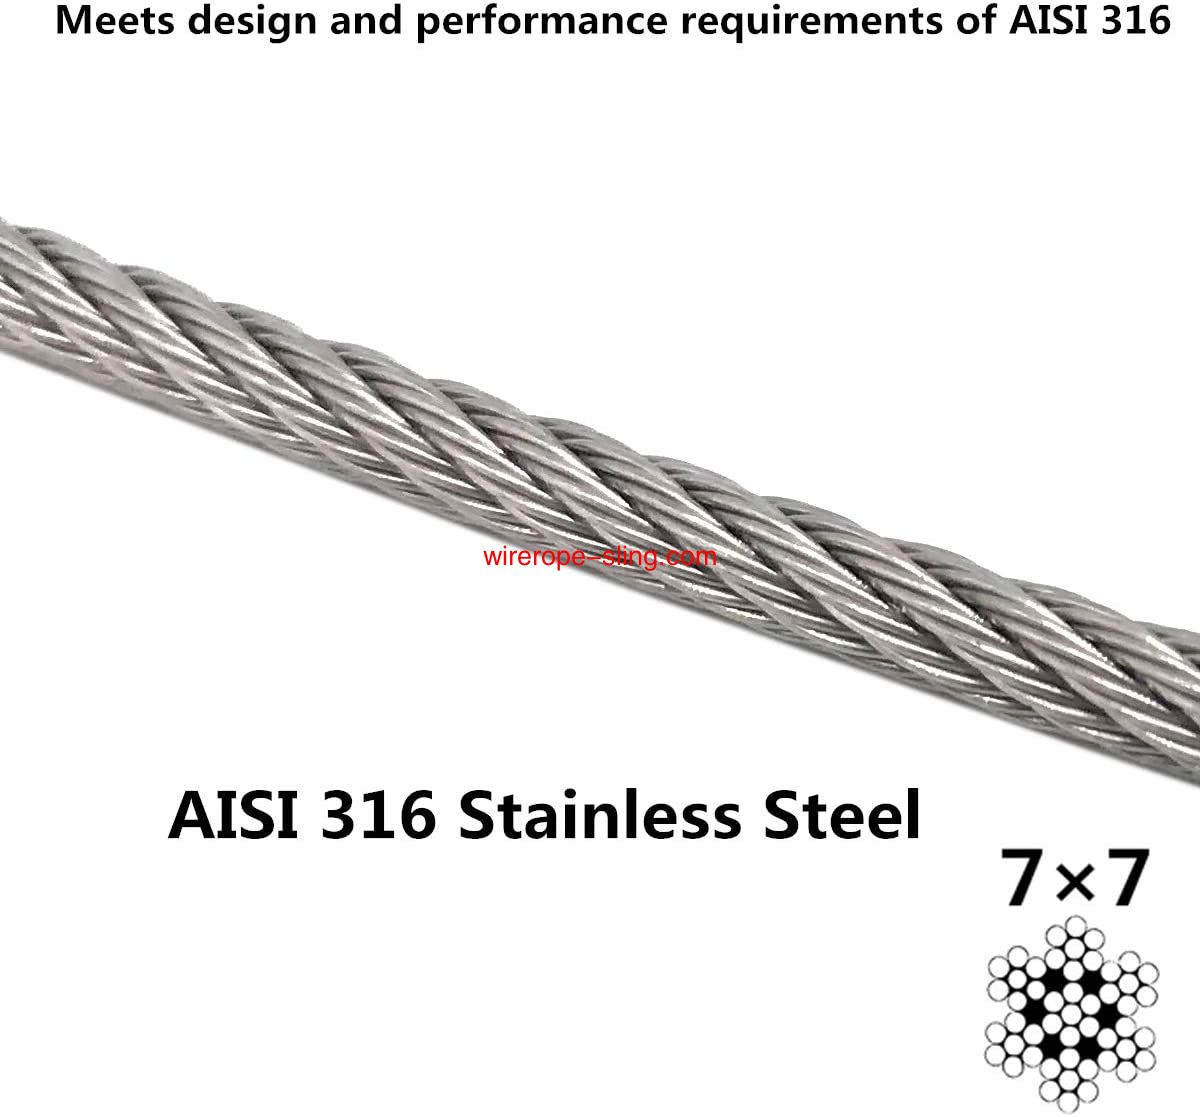 1/8 Stainless Steel Aircraft Wire Rope for Deck Cable Railing Kit,7 x 7 200 Feet T 316 Marine Grade